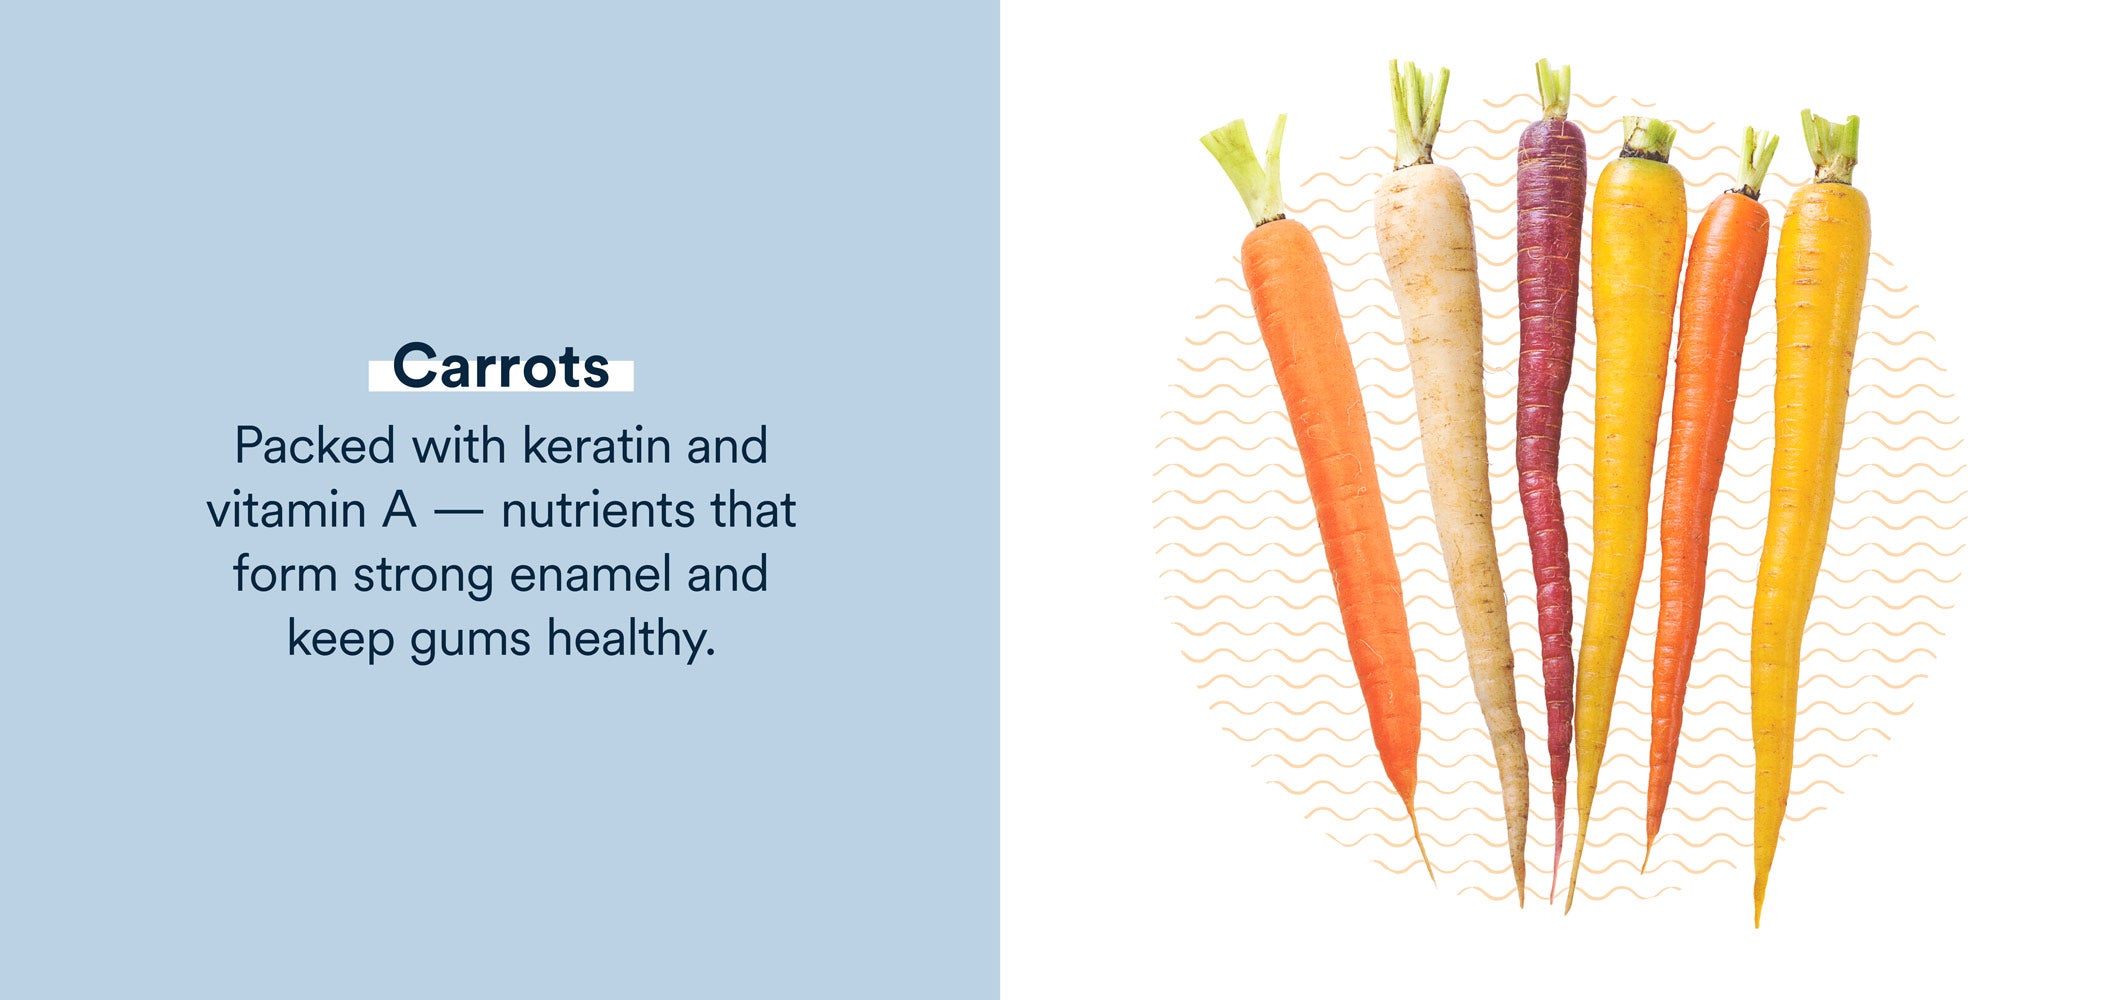 carrots are packed with nutrients that form strong enamel 